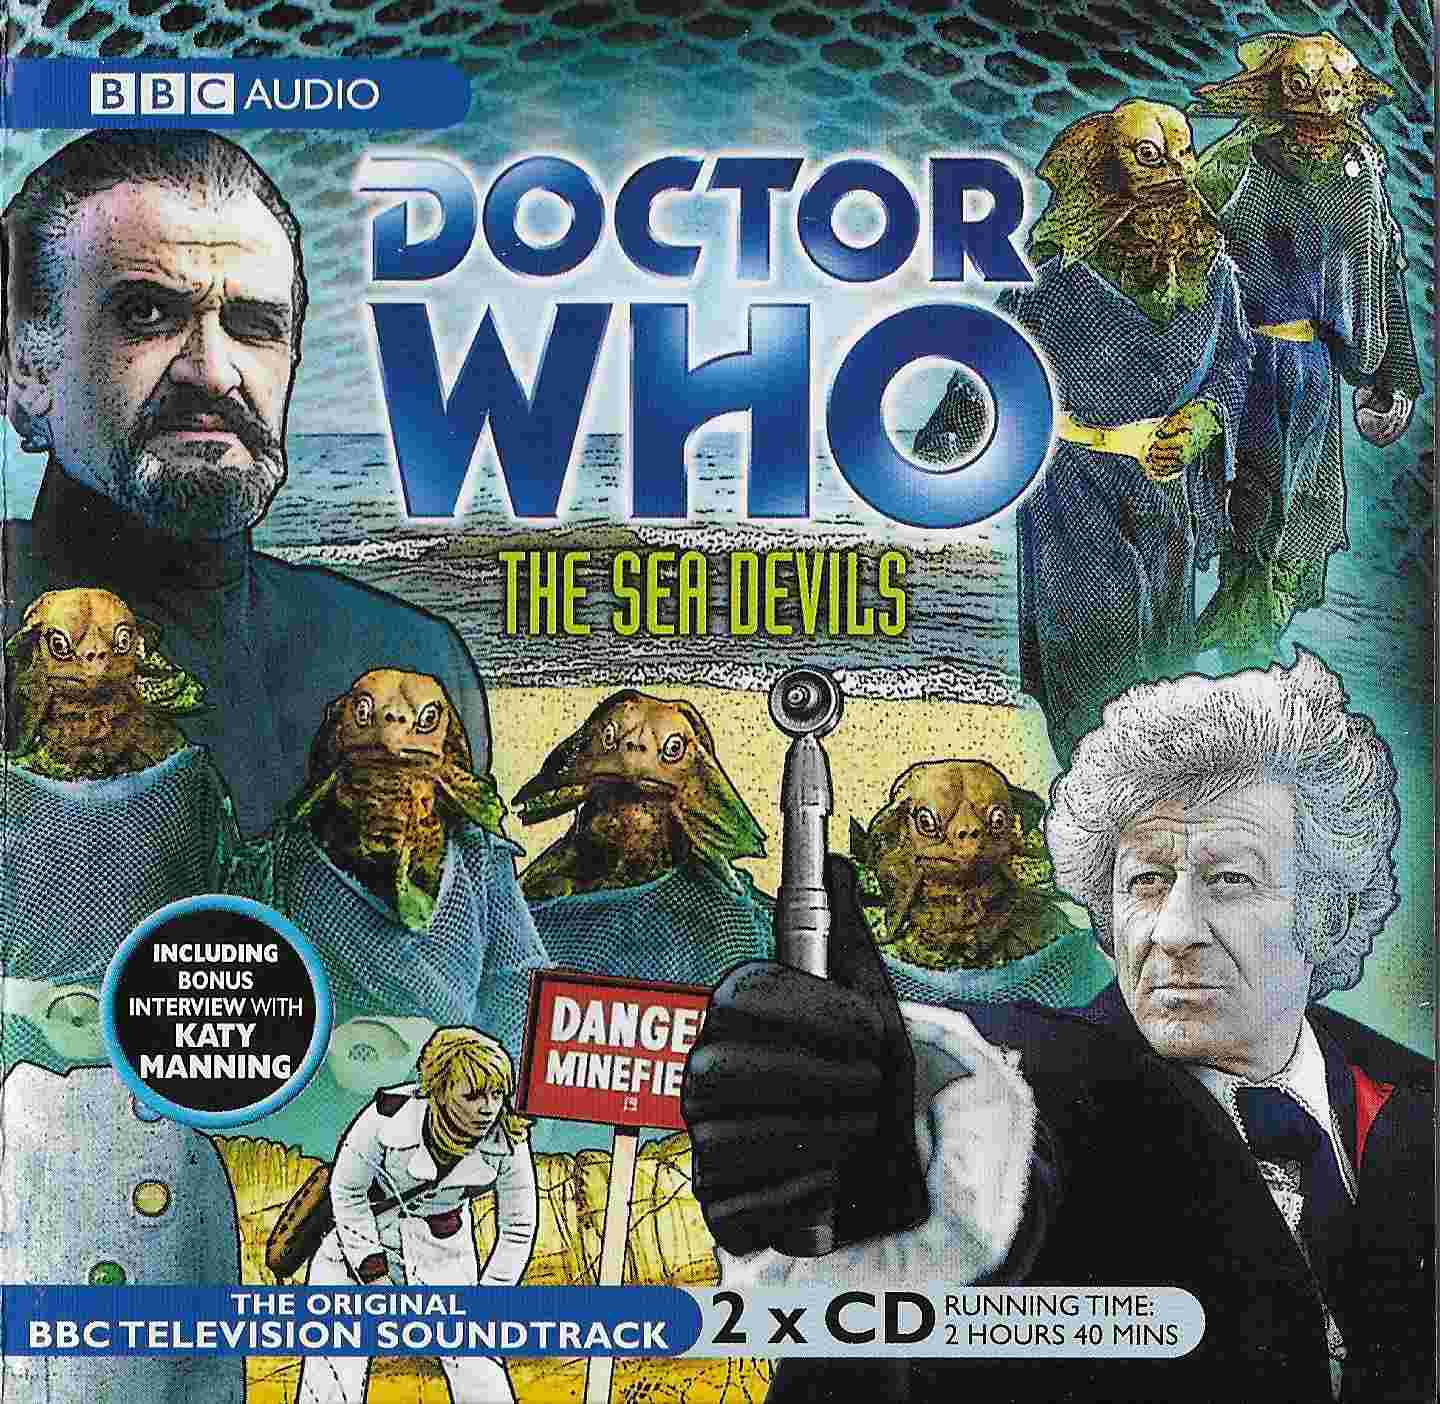 Picture of ISBN 1-4056-7737-6 Doctor Who - The sea devils by artist Malcolm Hulke from the BBC records and Tapes library